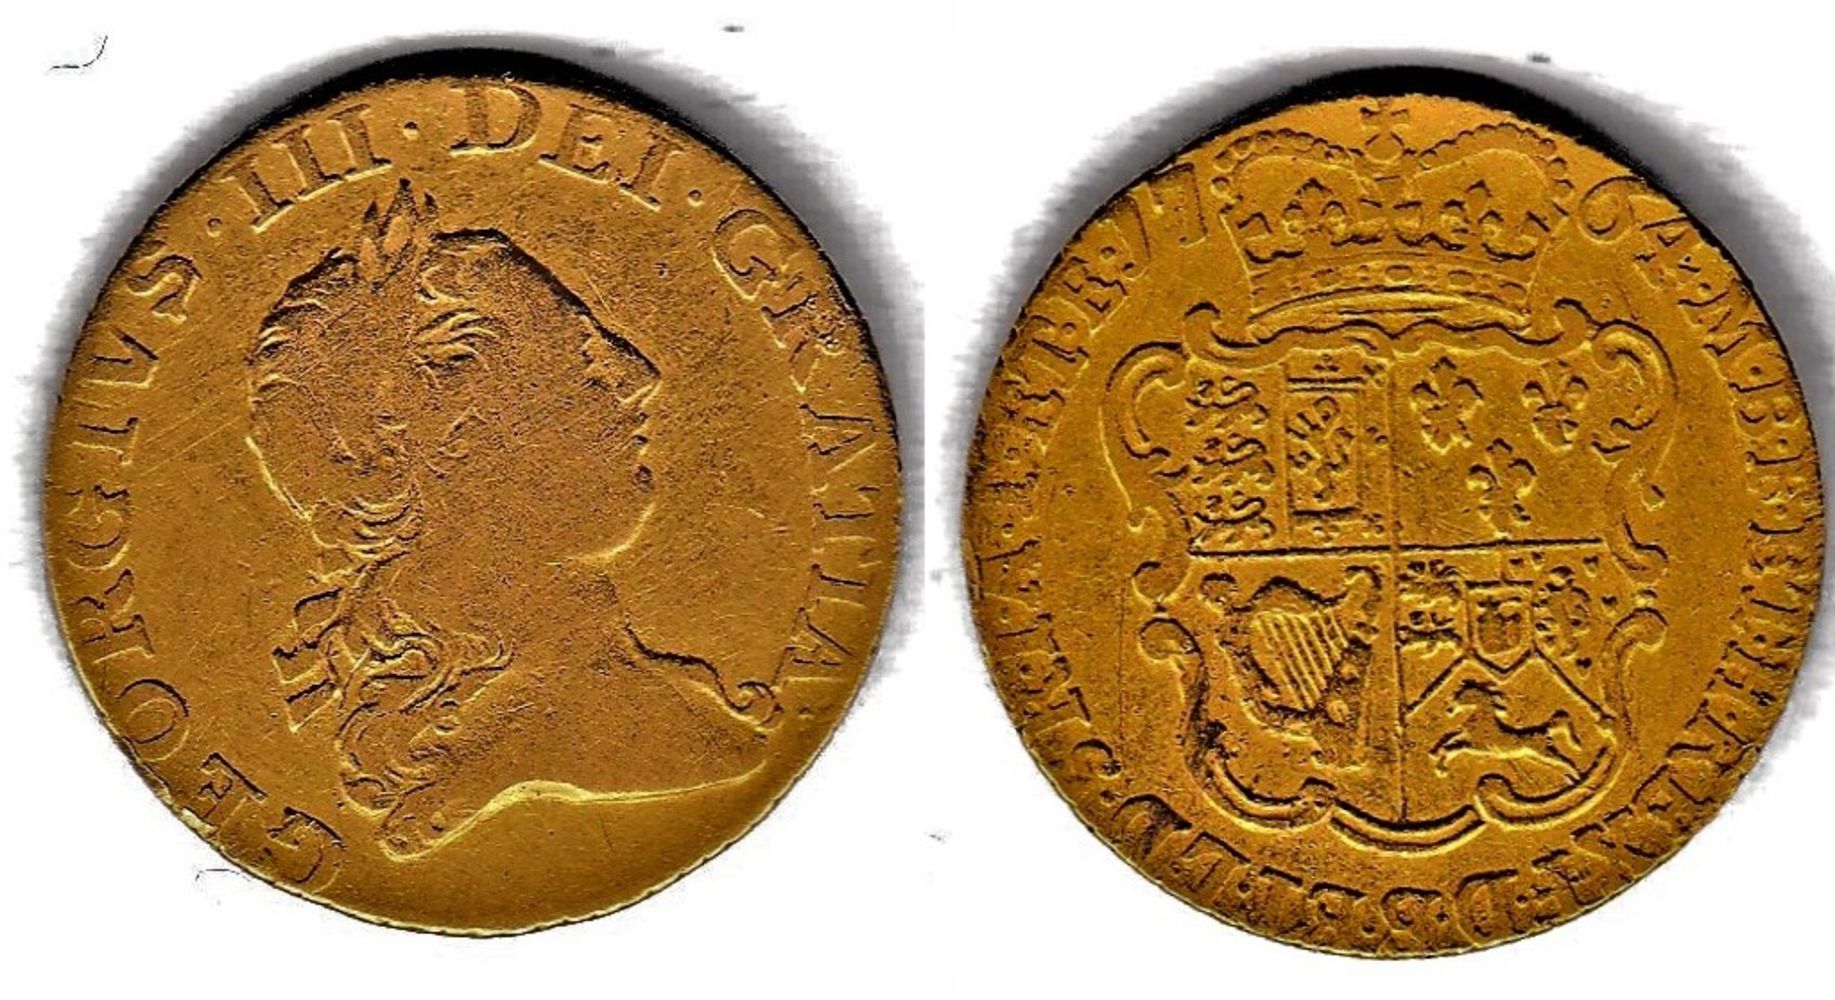 Coin and Banknote Auction - English Coinage incl: Gold, Silver Crowns, Halfcrowns, Shillings and World Banknotes.